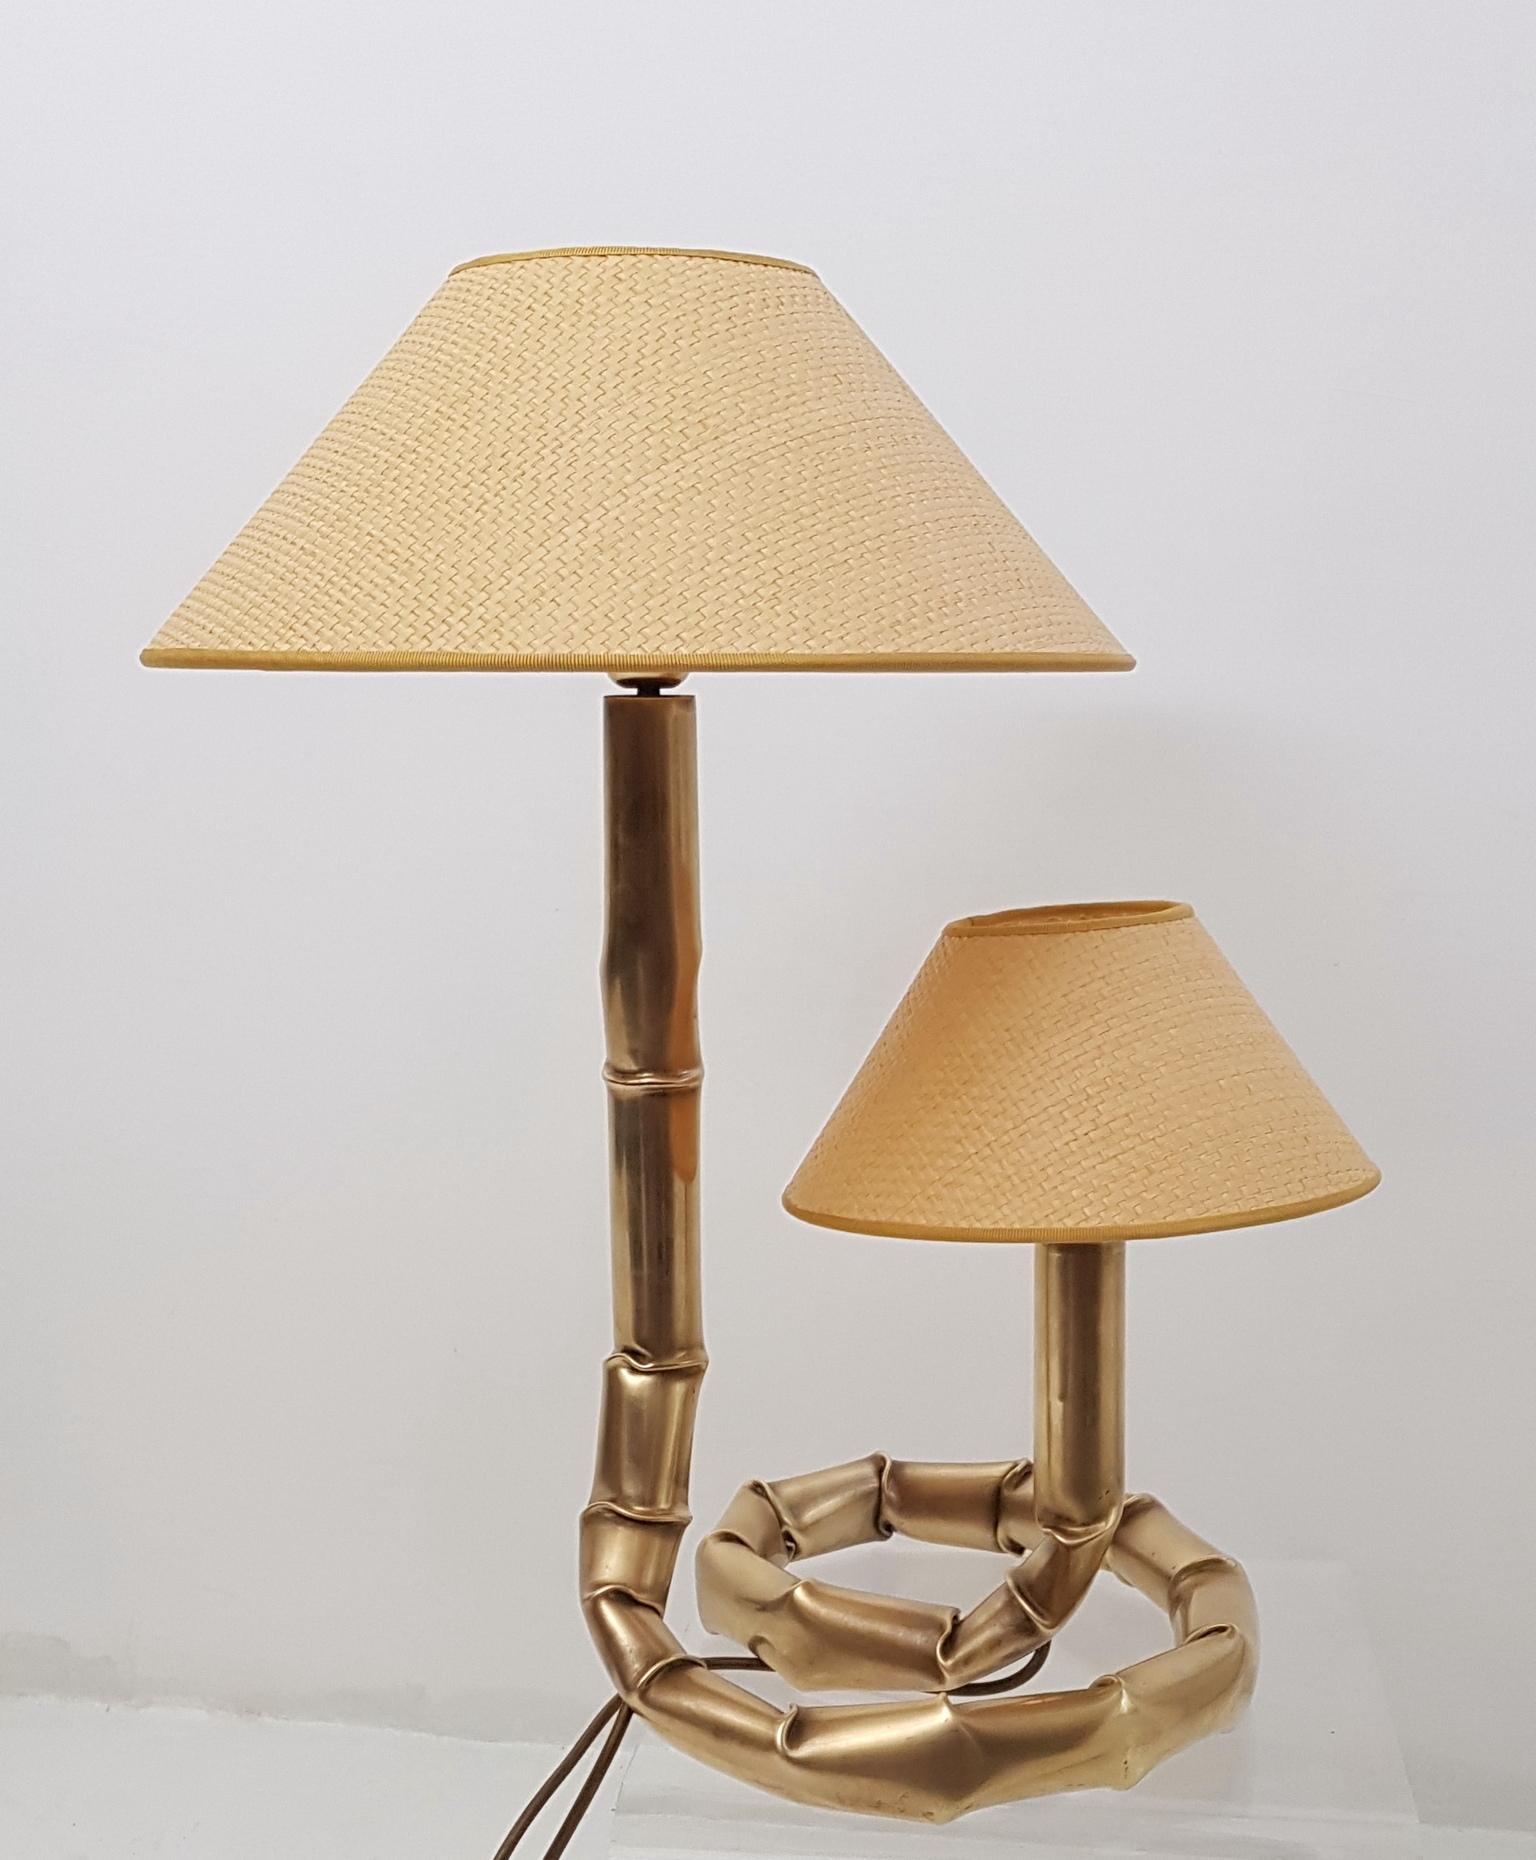 Rare handmade brass table lamp with double lights imitating bamboo with new handmade lampshades in rattan.